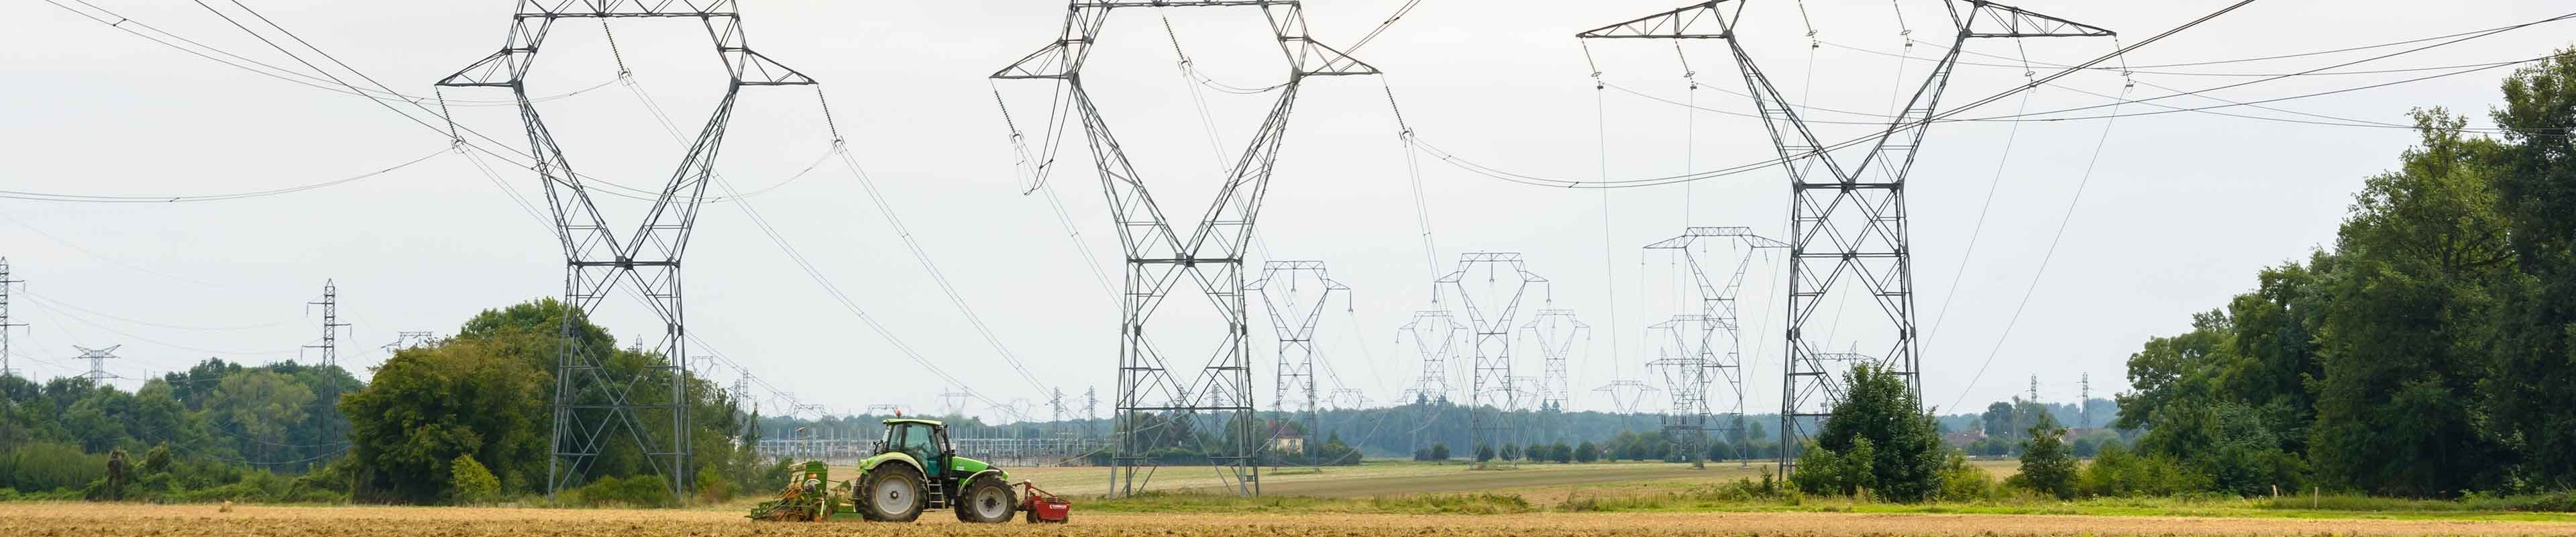 Image of a tractor working beneath power lines.